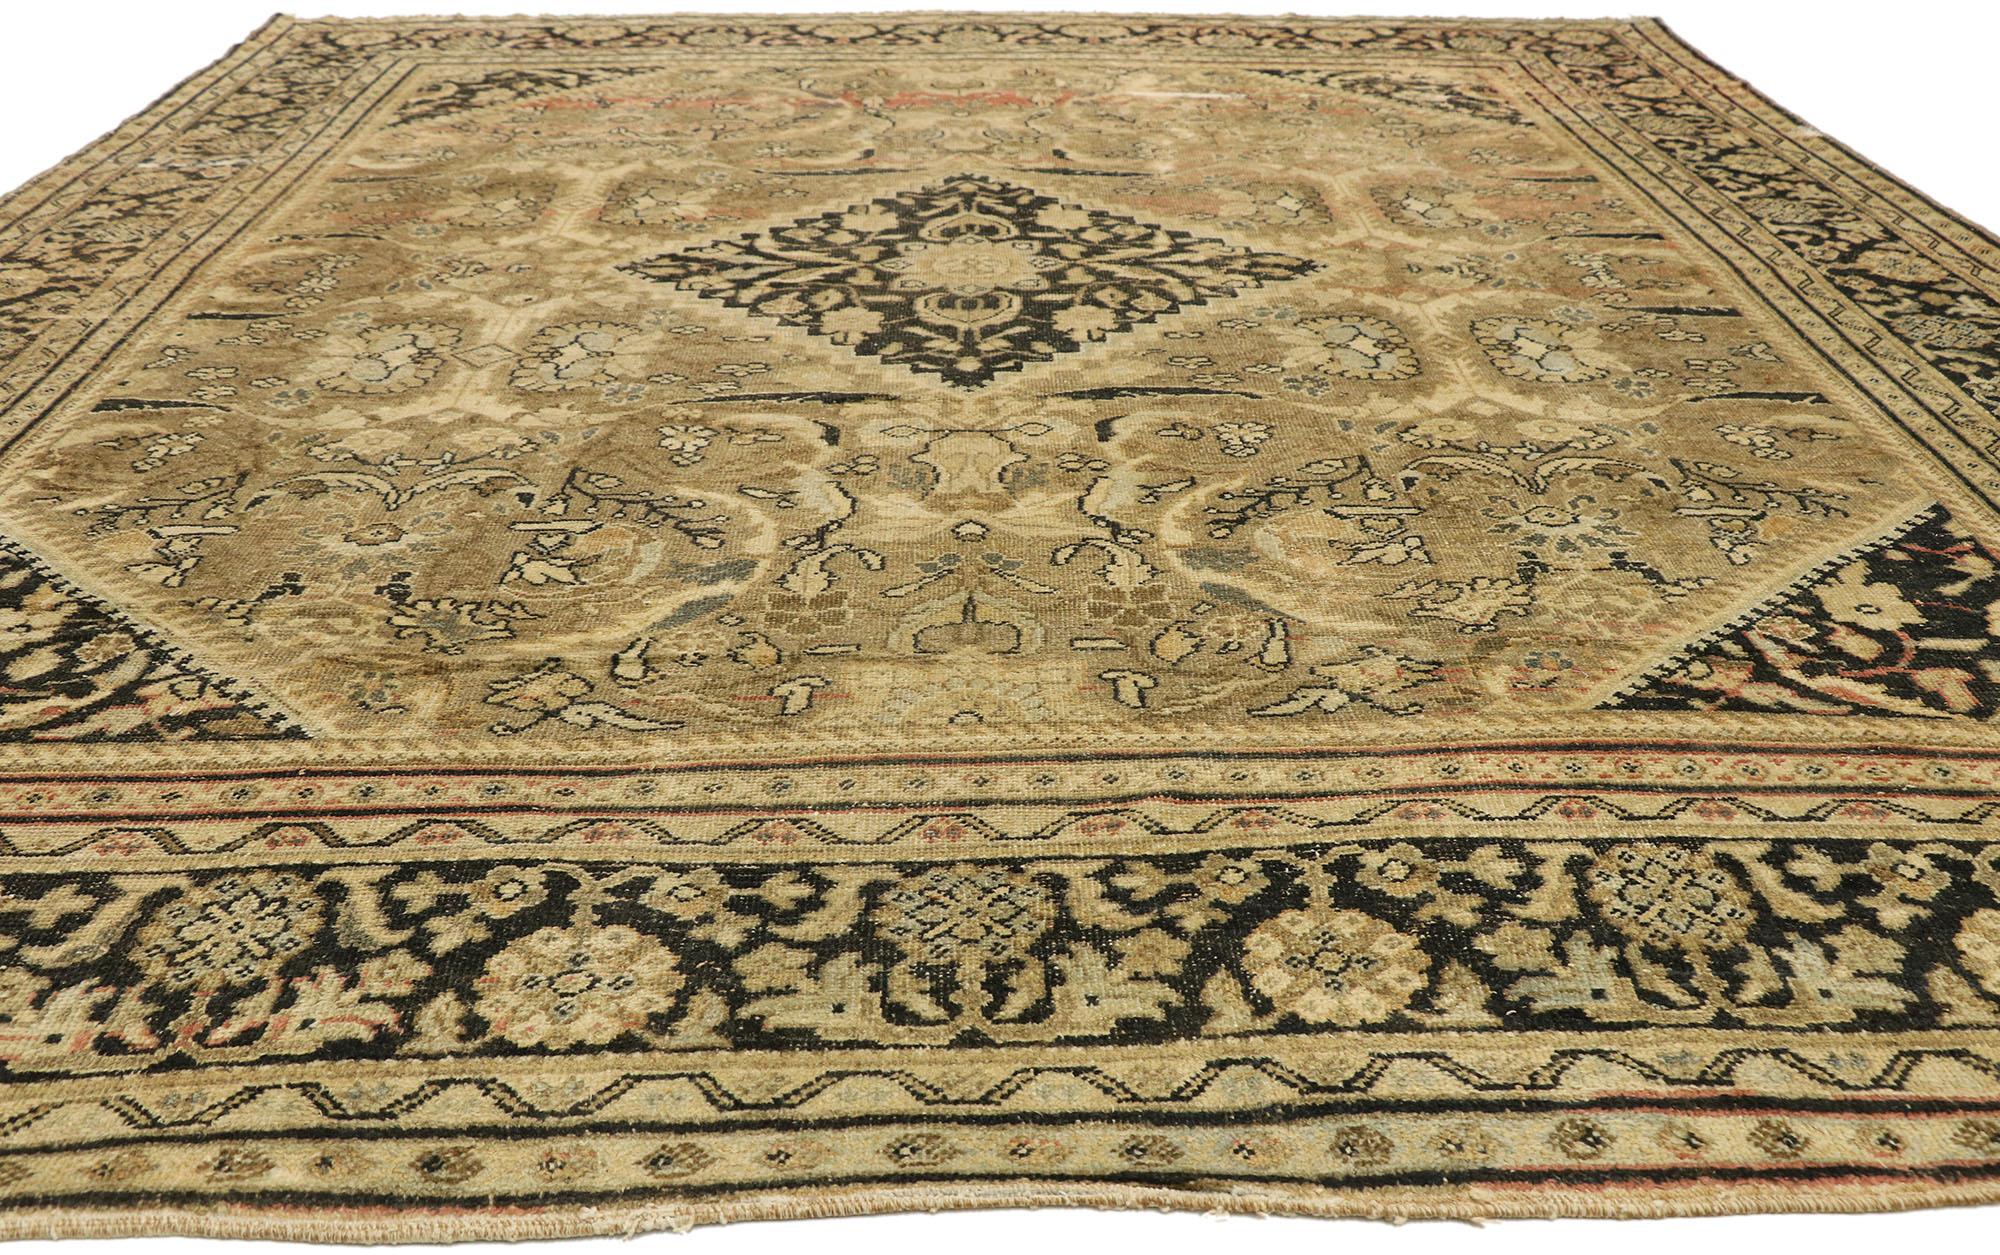 76729 Late 19th Century Distressed Antique Persian Mahal Rug with Modern Rustic English Style 10'04 x 12'04. With its perfectly worn-in charm and rustic sensibility, this hand-knotted wool distressed antique Persian Mahal rug will take on a curated